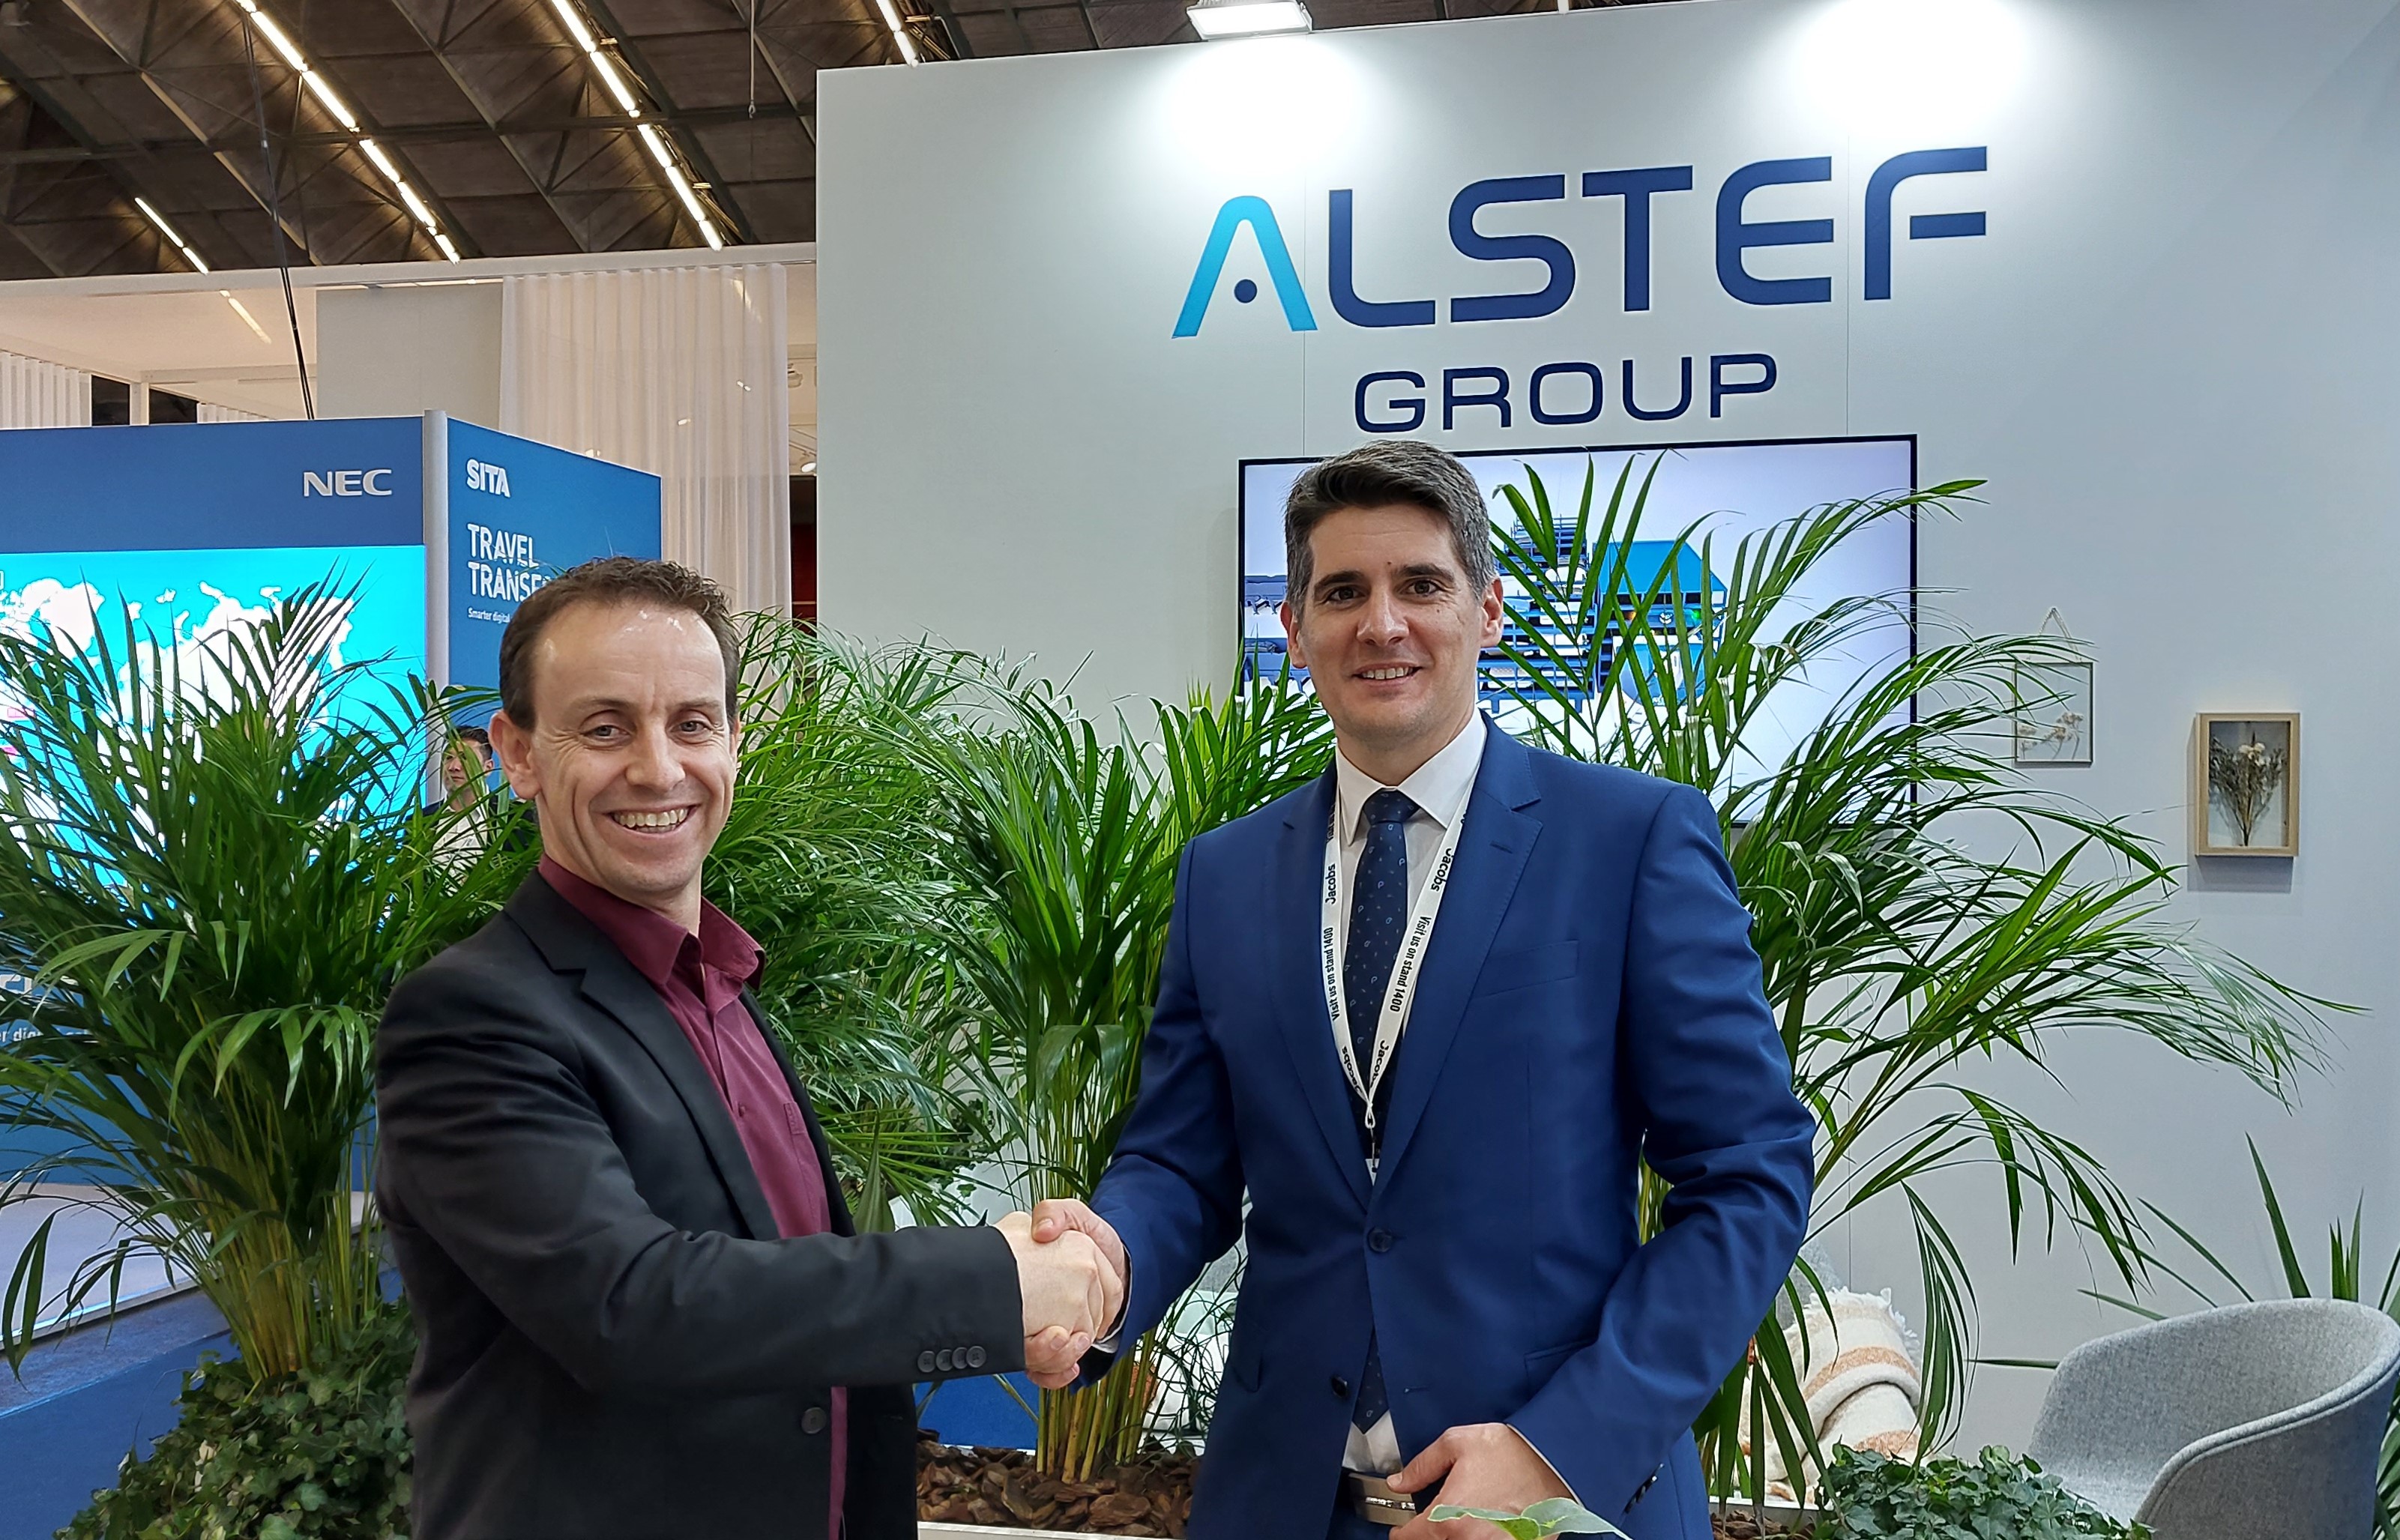 Sofia chooses Alstef to upgrade baggage system